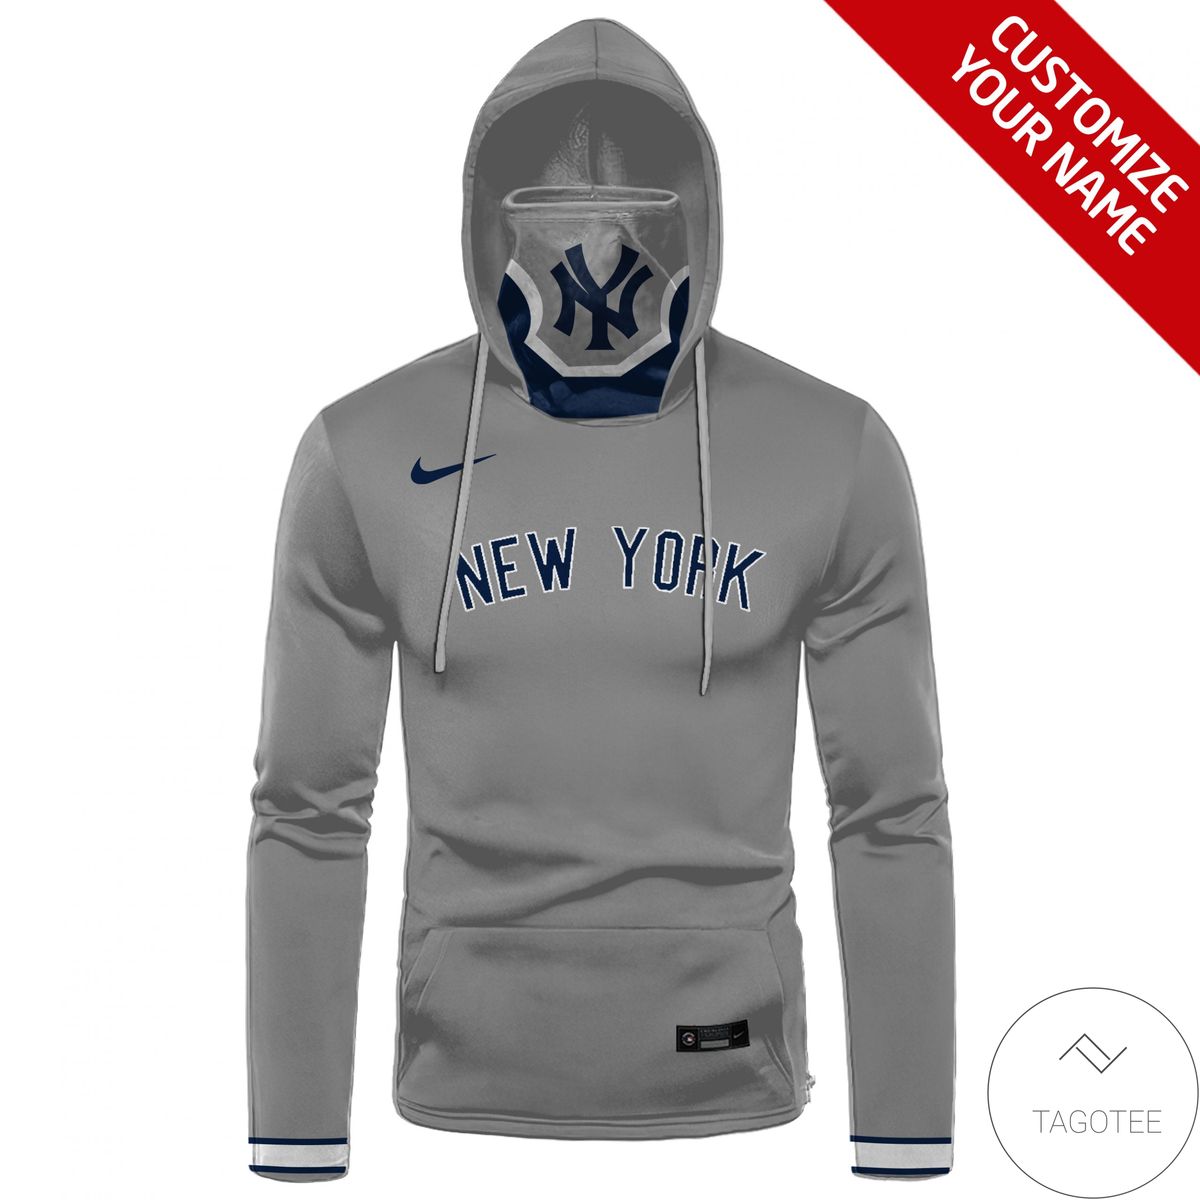 Personalized Name And Number New York Yankees Grey Gaiter Mask Hoodie